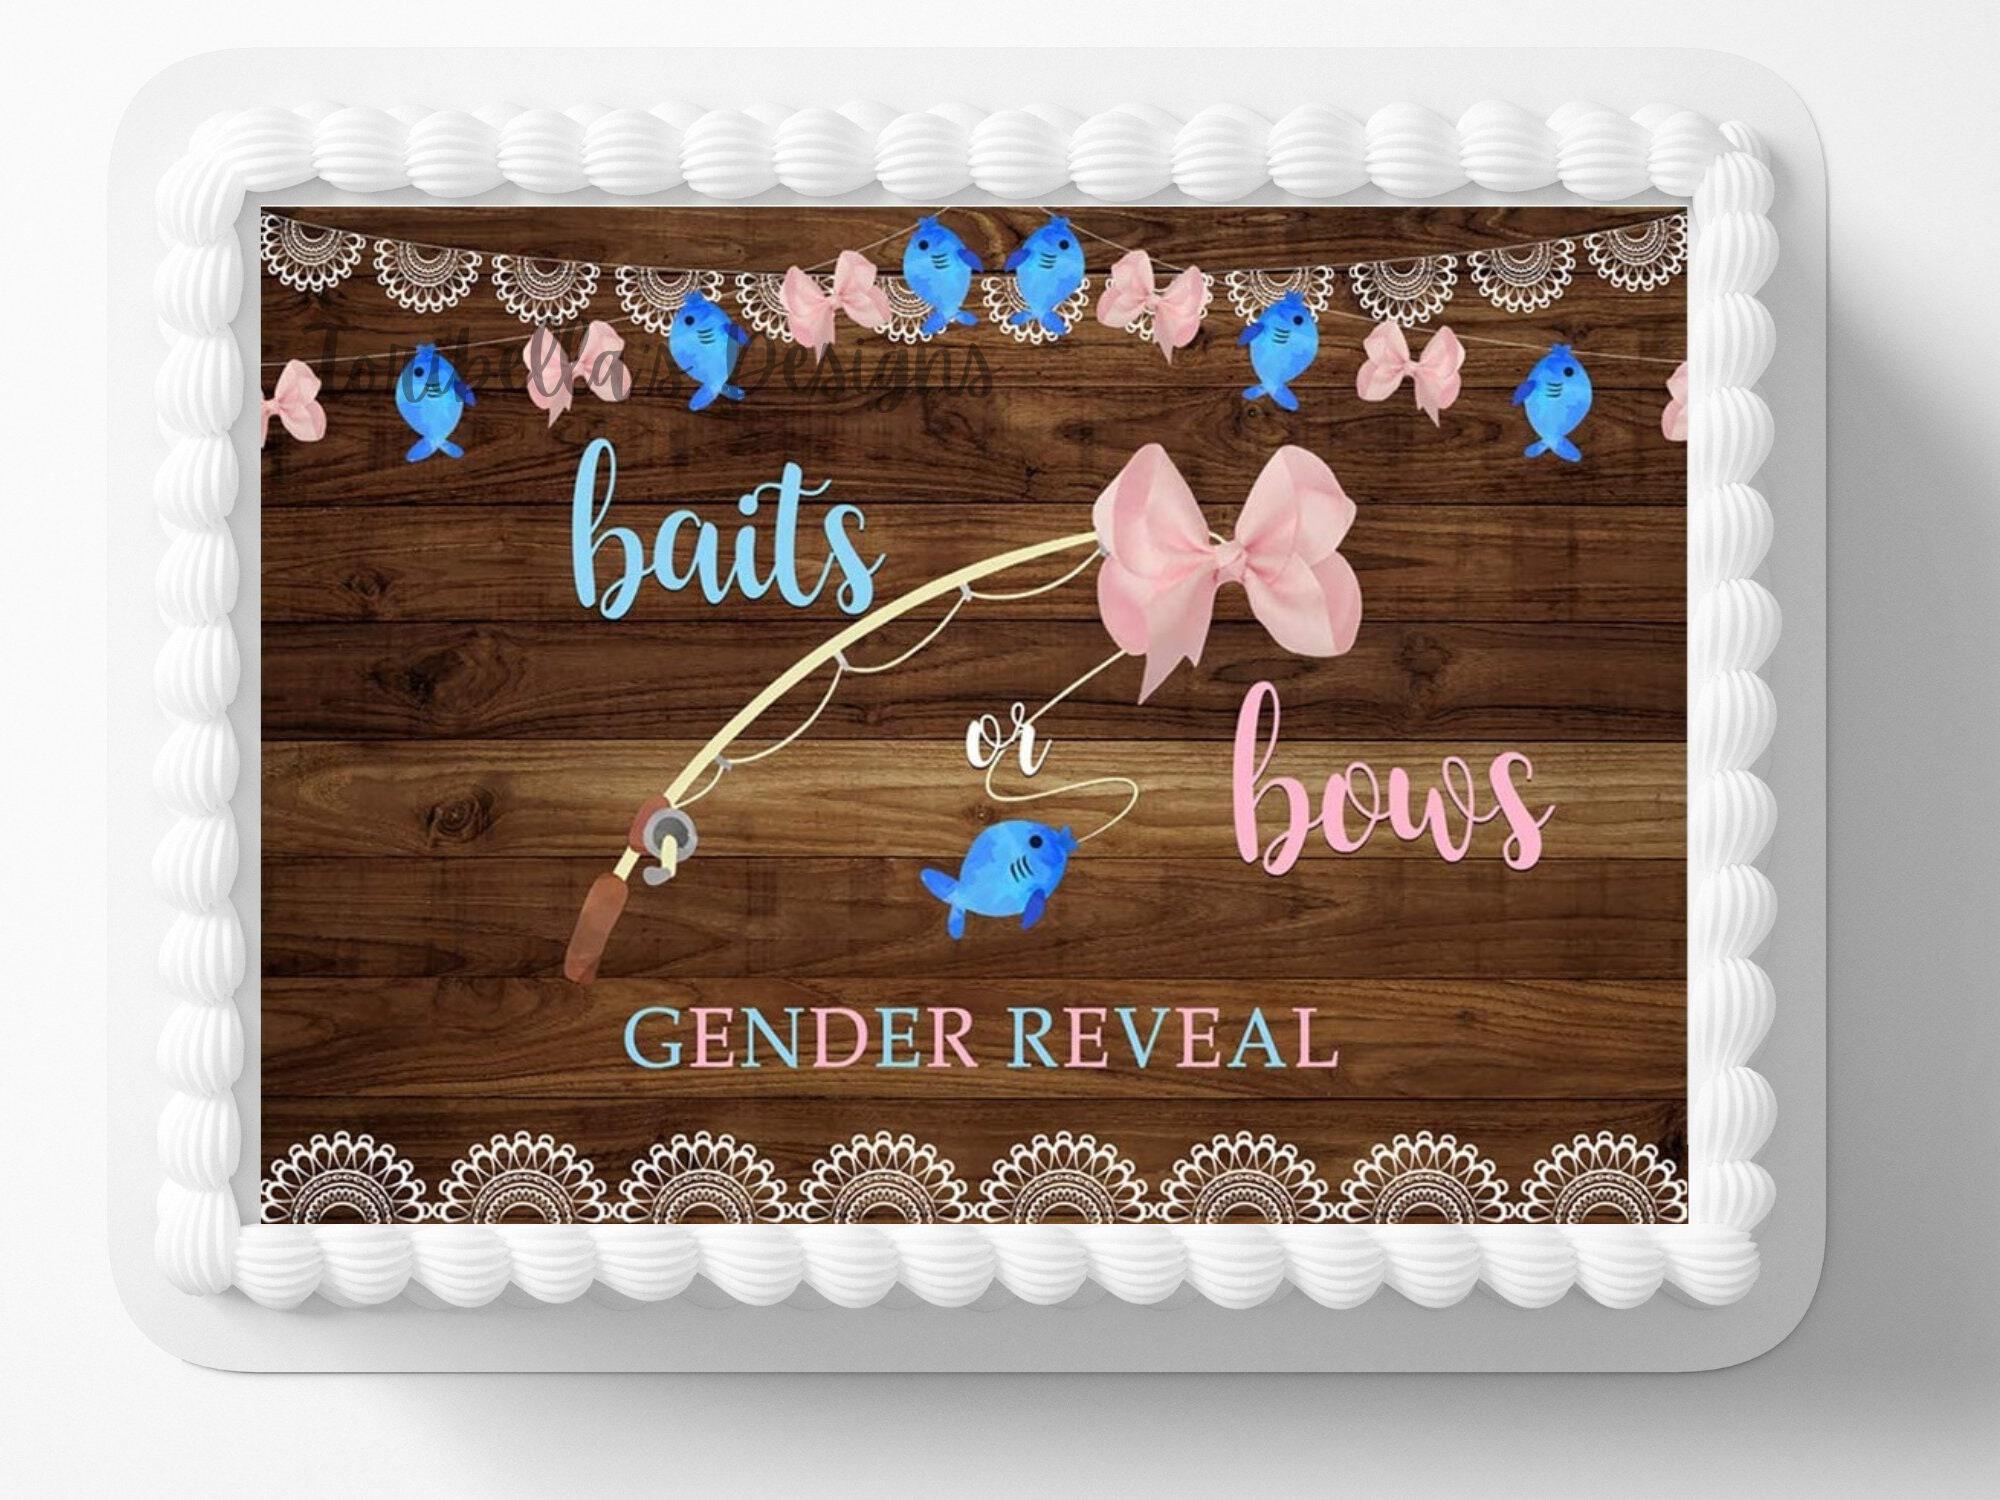 Wedding & Celebrations :: Party Supplies :: Cake Toppers :: Gender